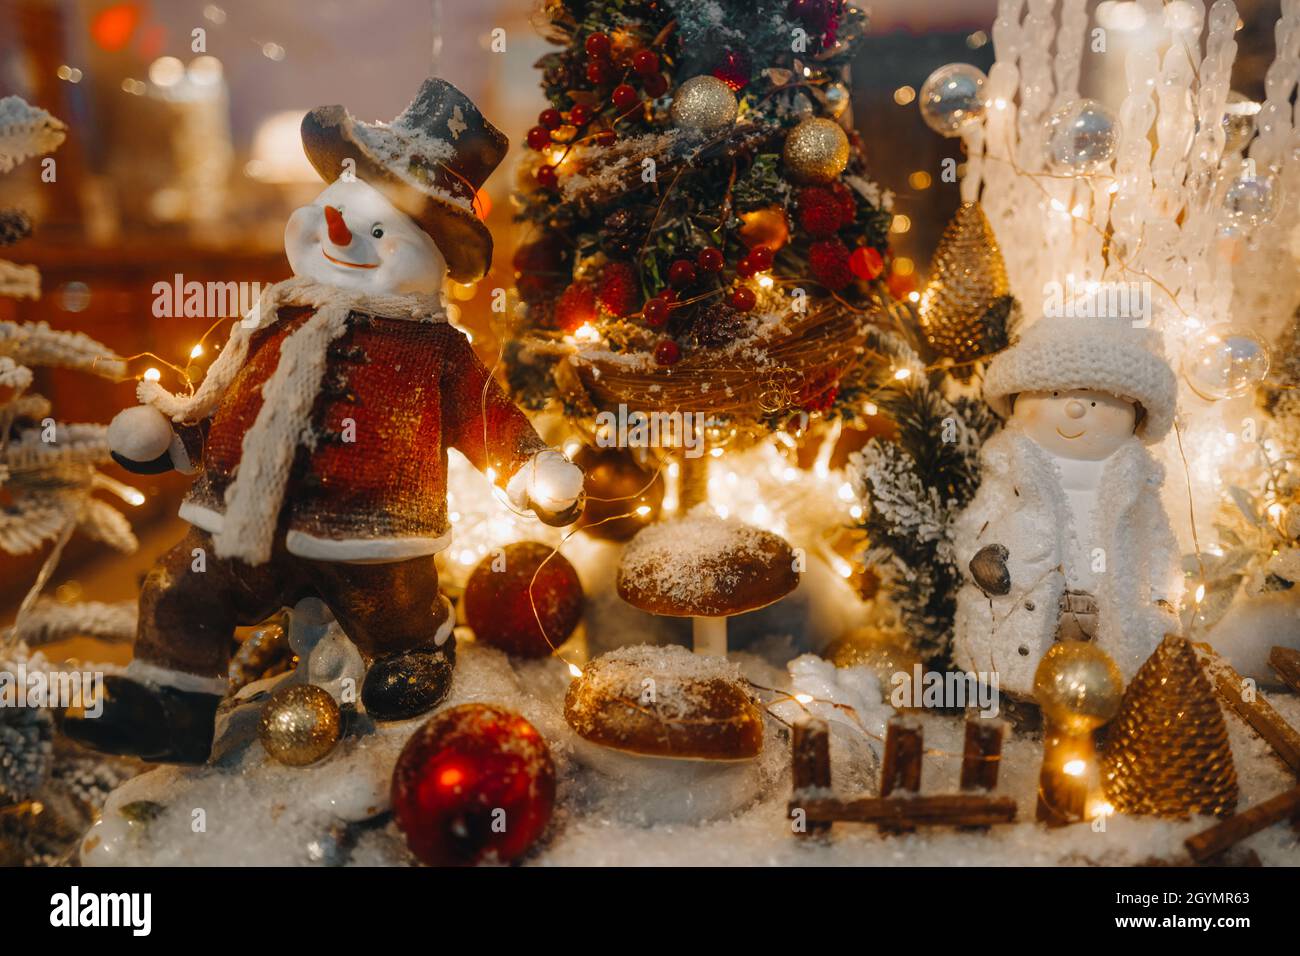 Funny winter toy snowman and snow covered Christmas tree with golden lights on a festive storefront. New Year and Merry Christmas decorations and a ma Stock Photo